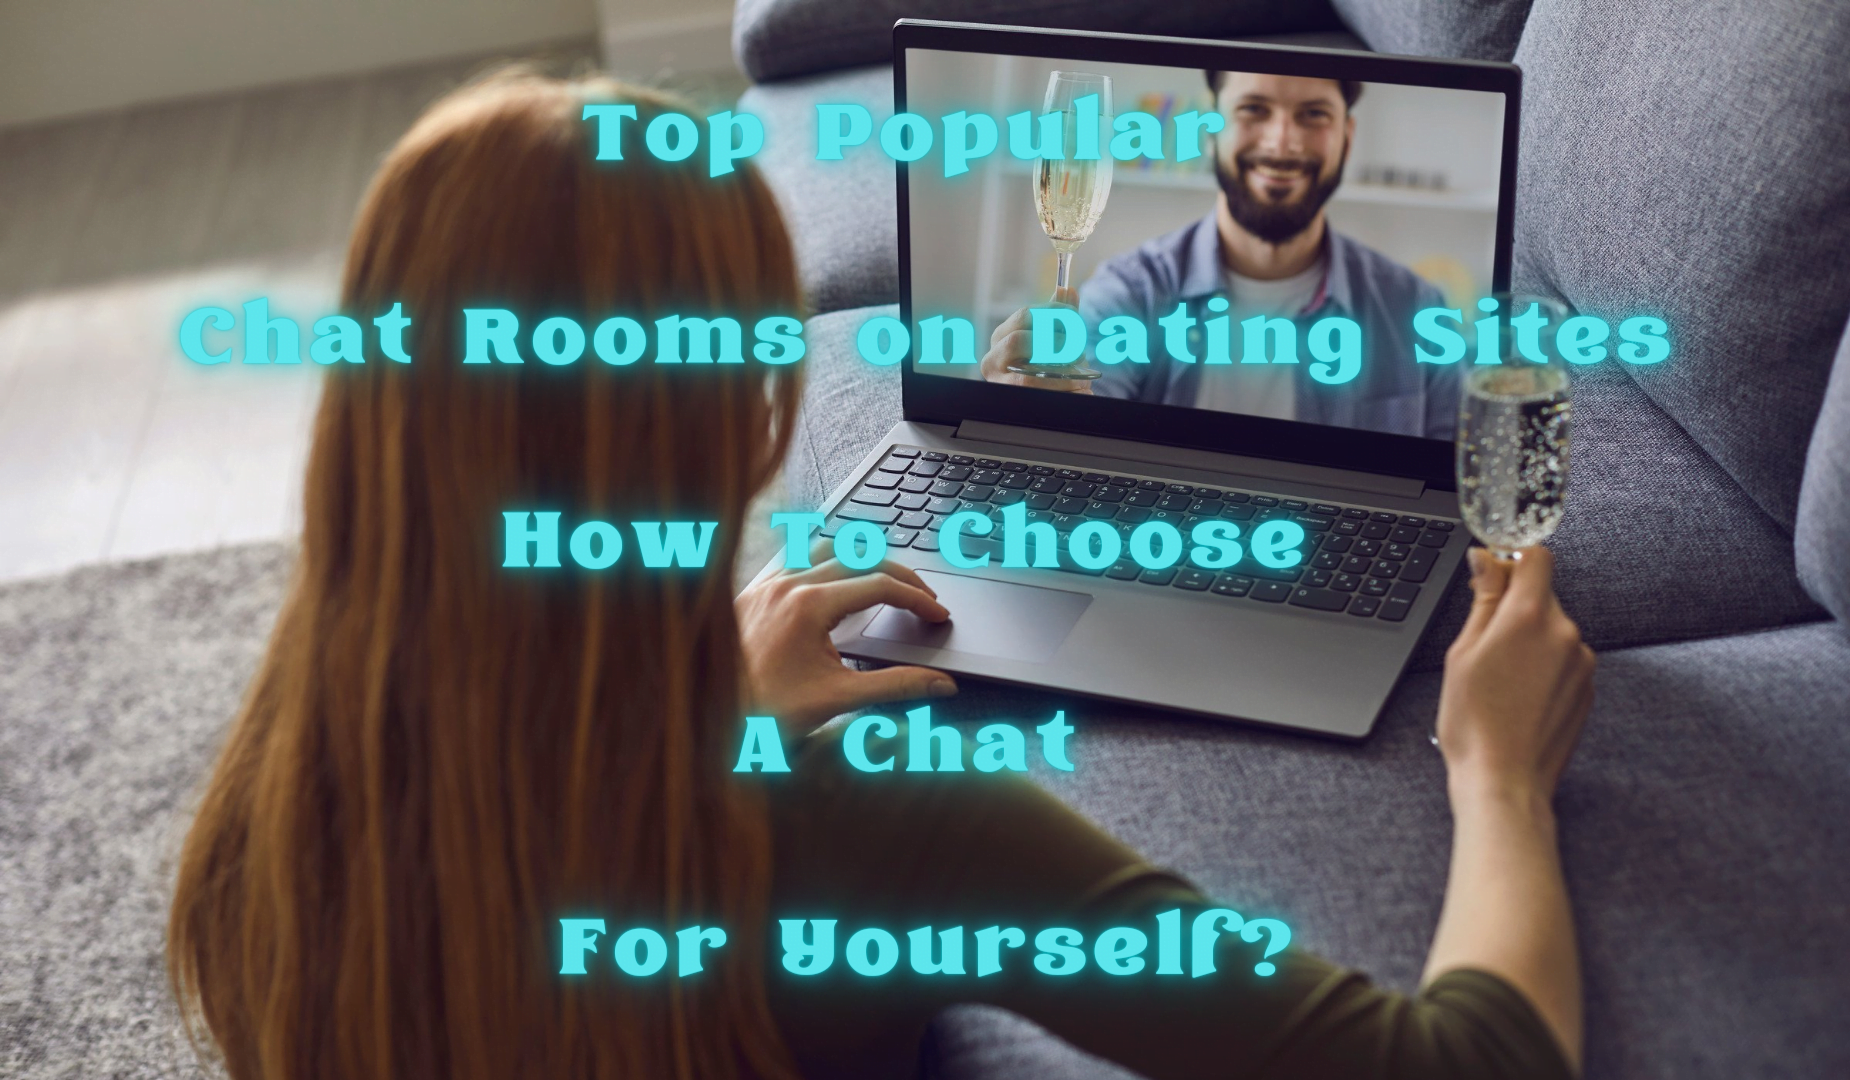 Top Popular Chat Rooms on Dating Sites: How to Choose a Chat for Yourself?